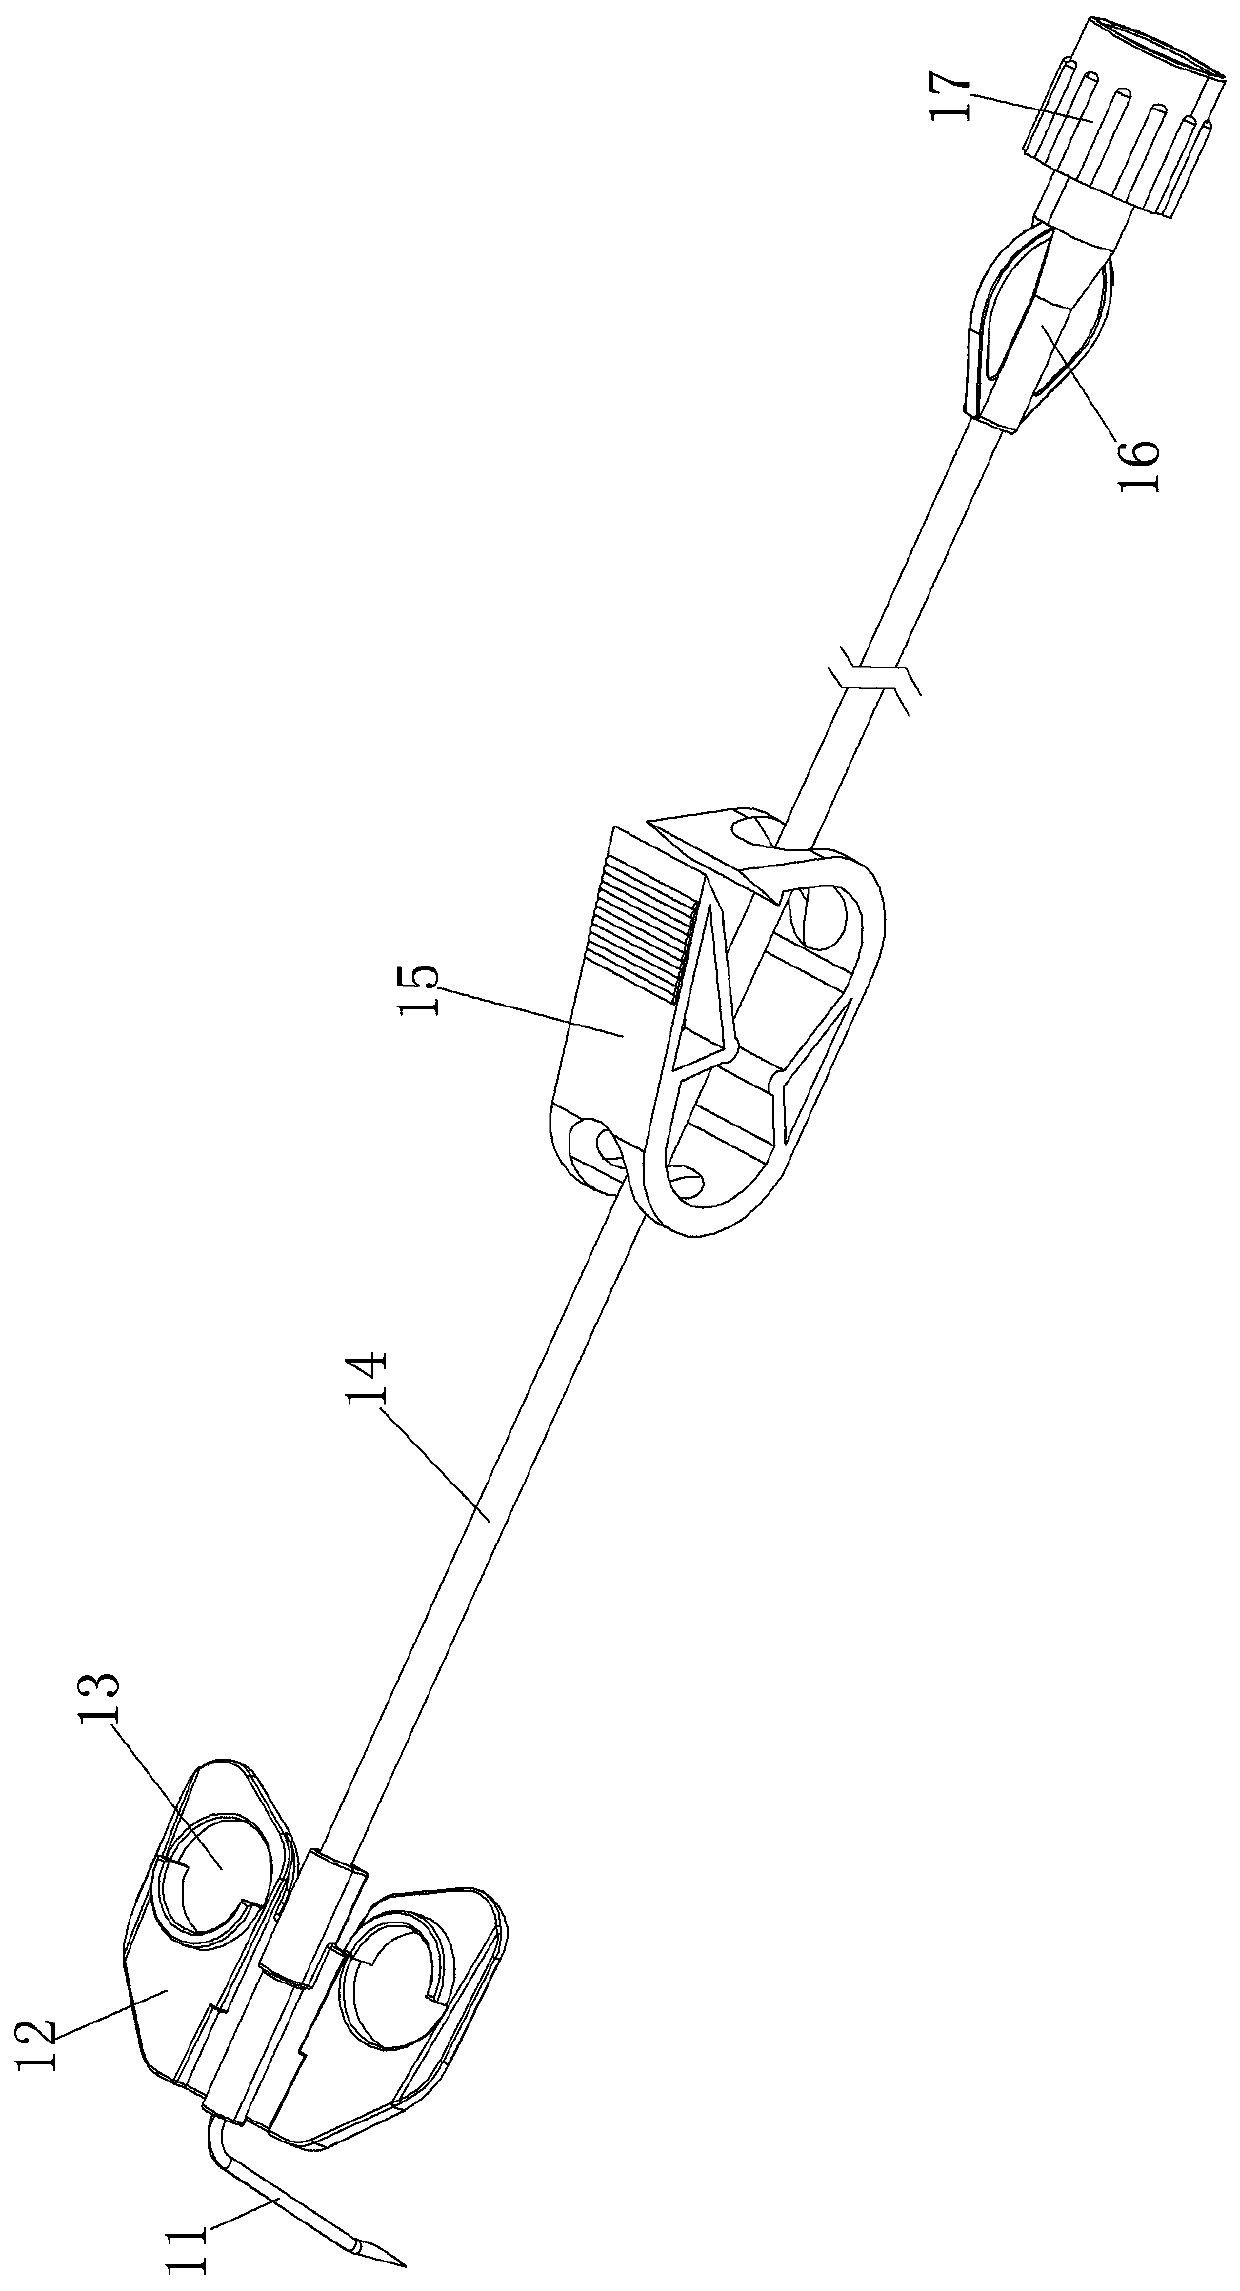 Special needle for implantable drug delivery apparatus